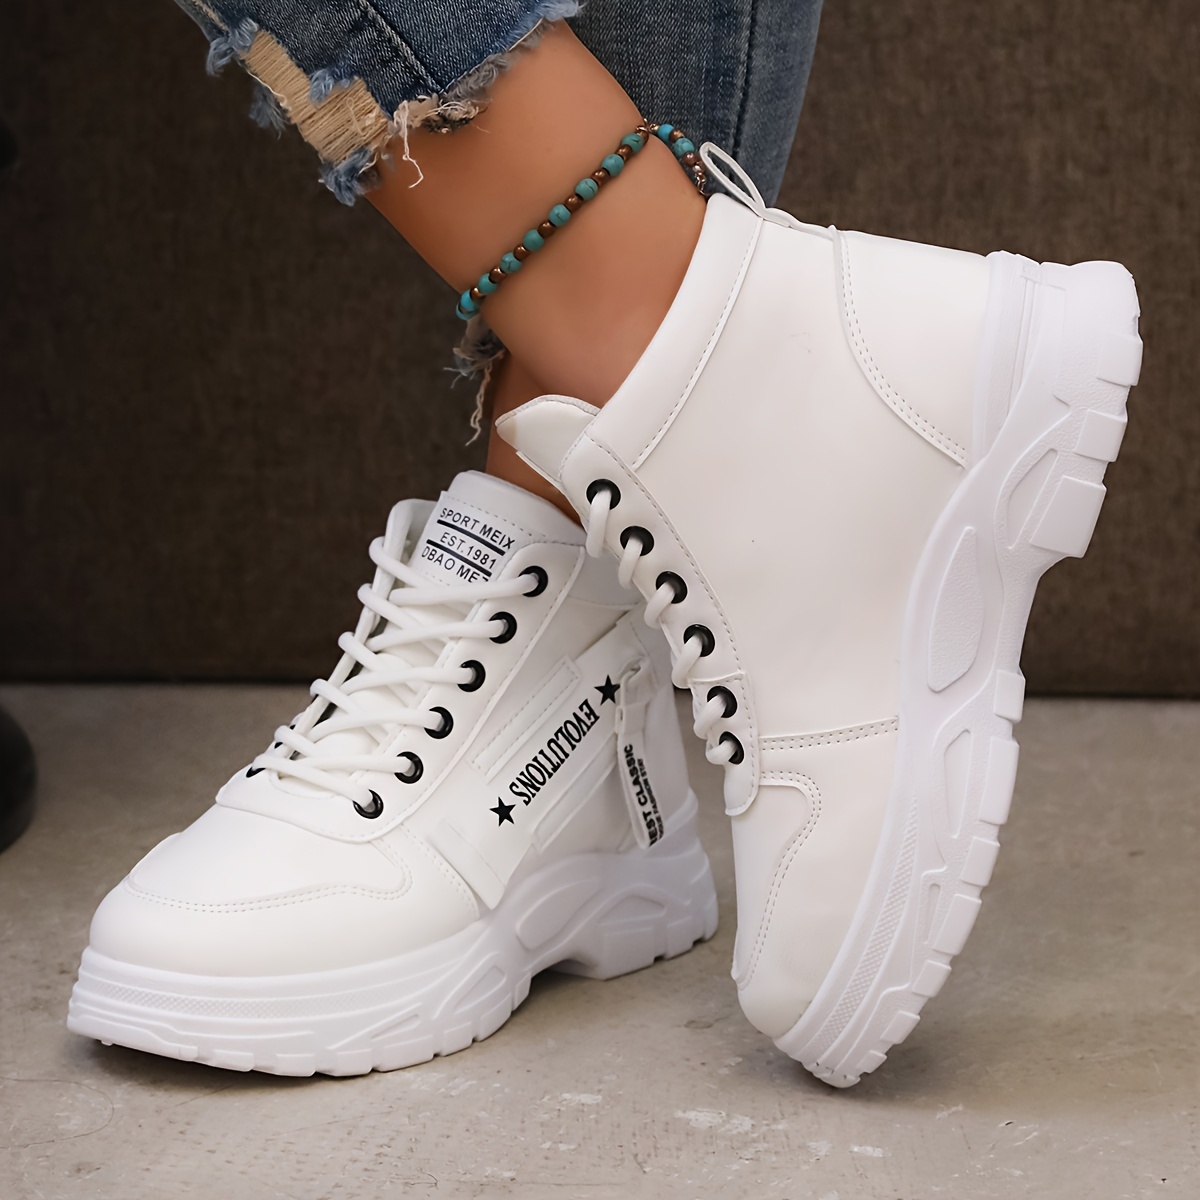 womens plush lined sneakers winter warm lace up high top ankle boots thermal outdoor shoes details 6